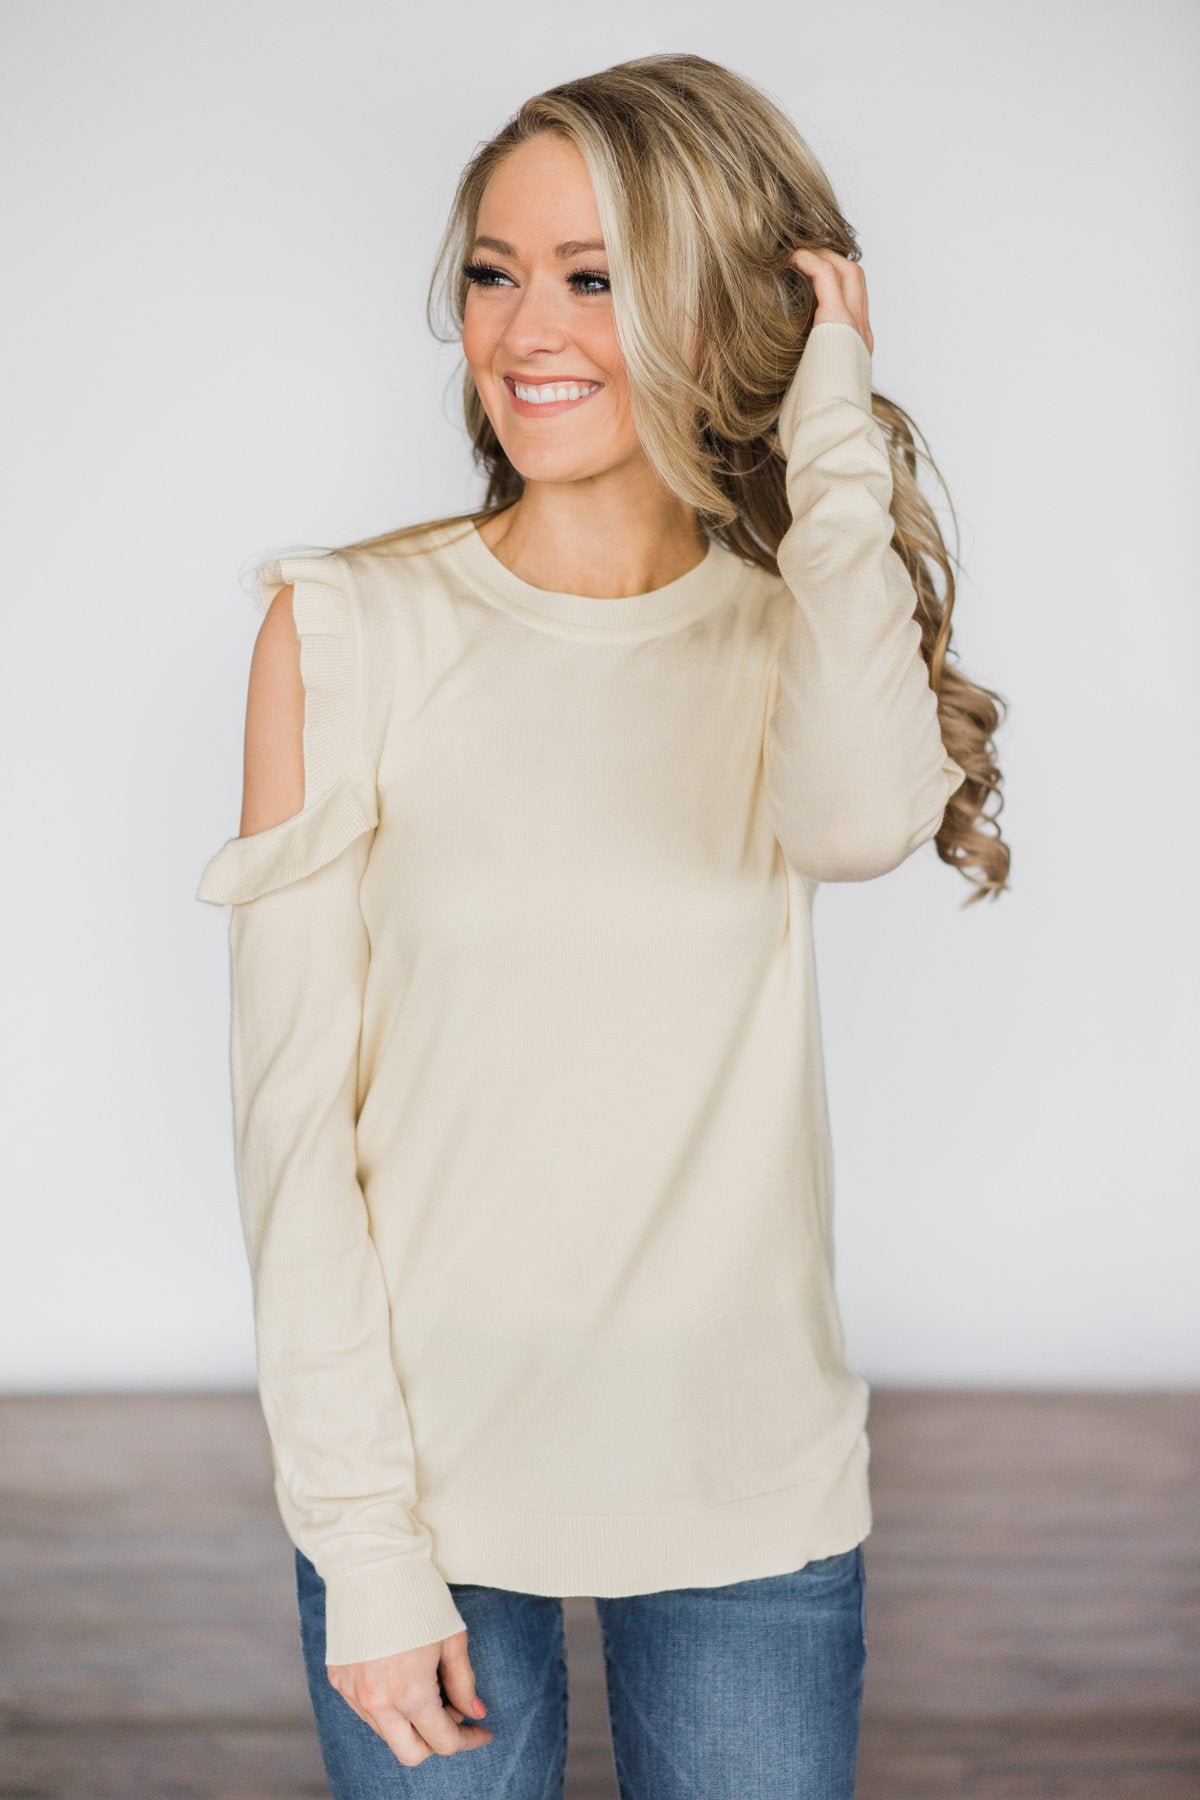 All Ruffled Up Cream Cold Shoulder Top